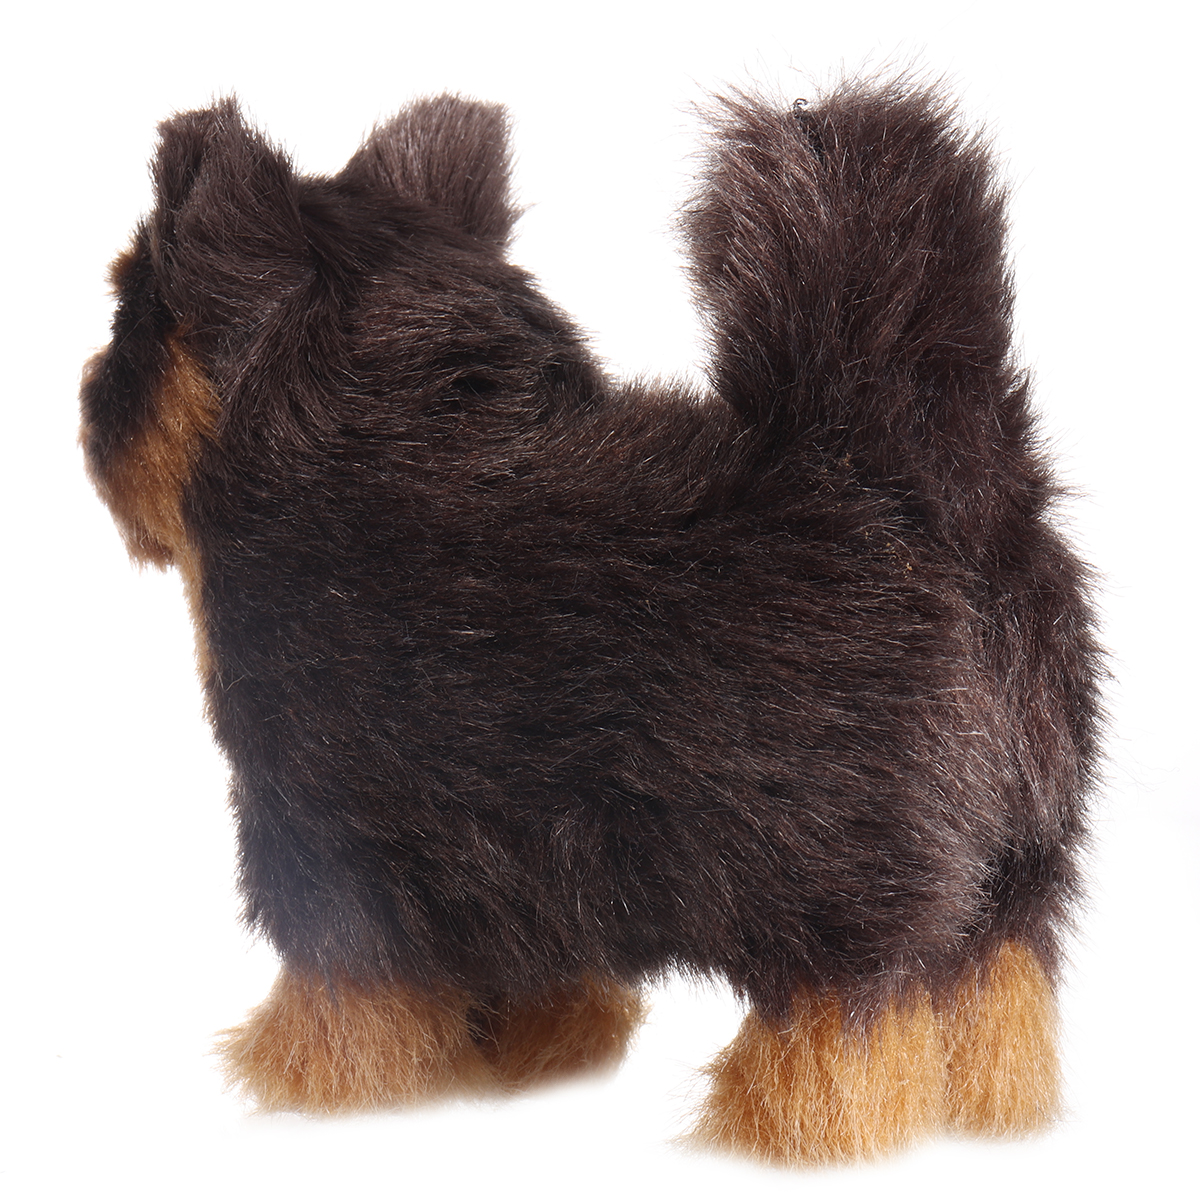 Yorkshires-Terrier-Realistic-Simulation-Plush-Dog-Lifelike-Animal-Dolls-Toy-for-Home-Decoration-Coll-1788619-8